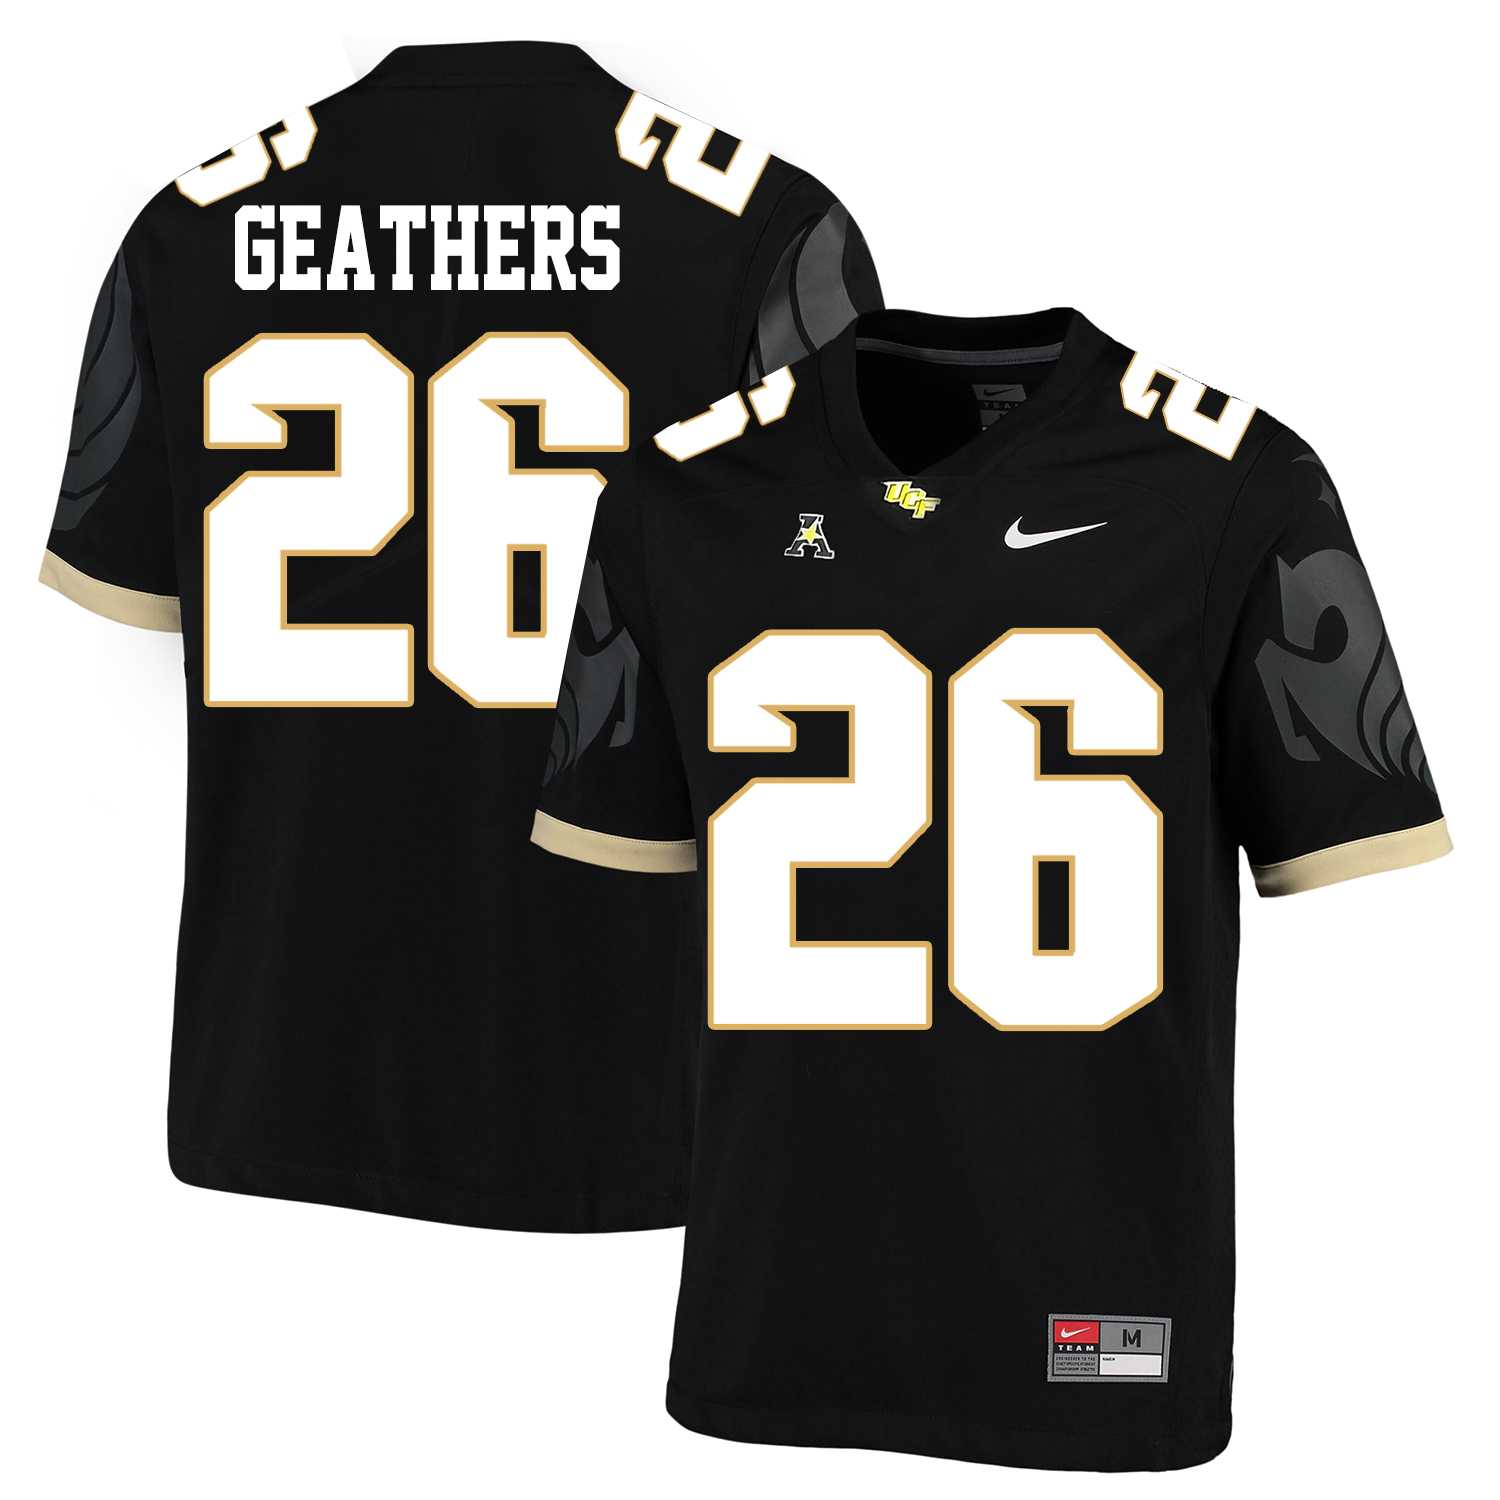 UCF Knights 26 Clayton Geathers Black College Football Jersey DingZhi